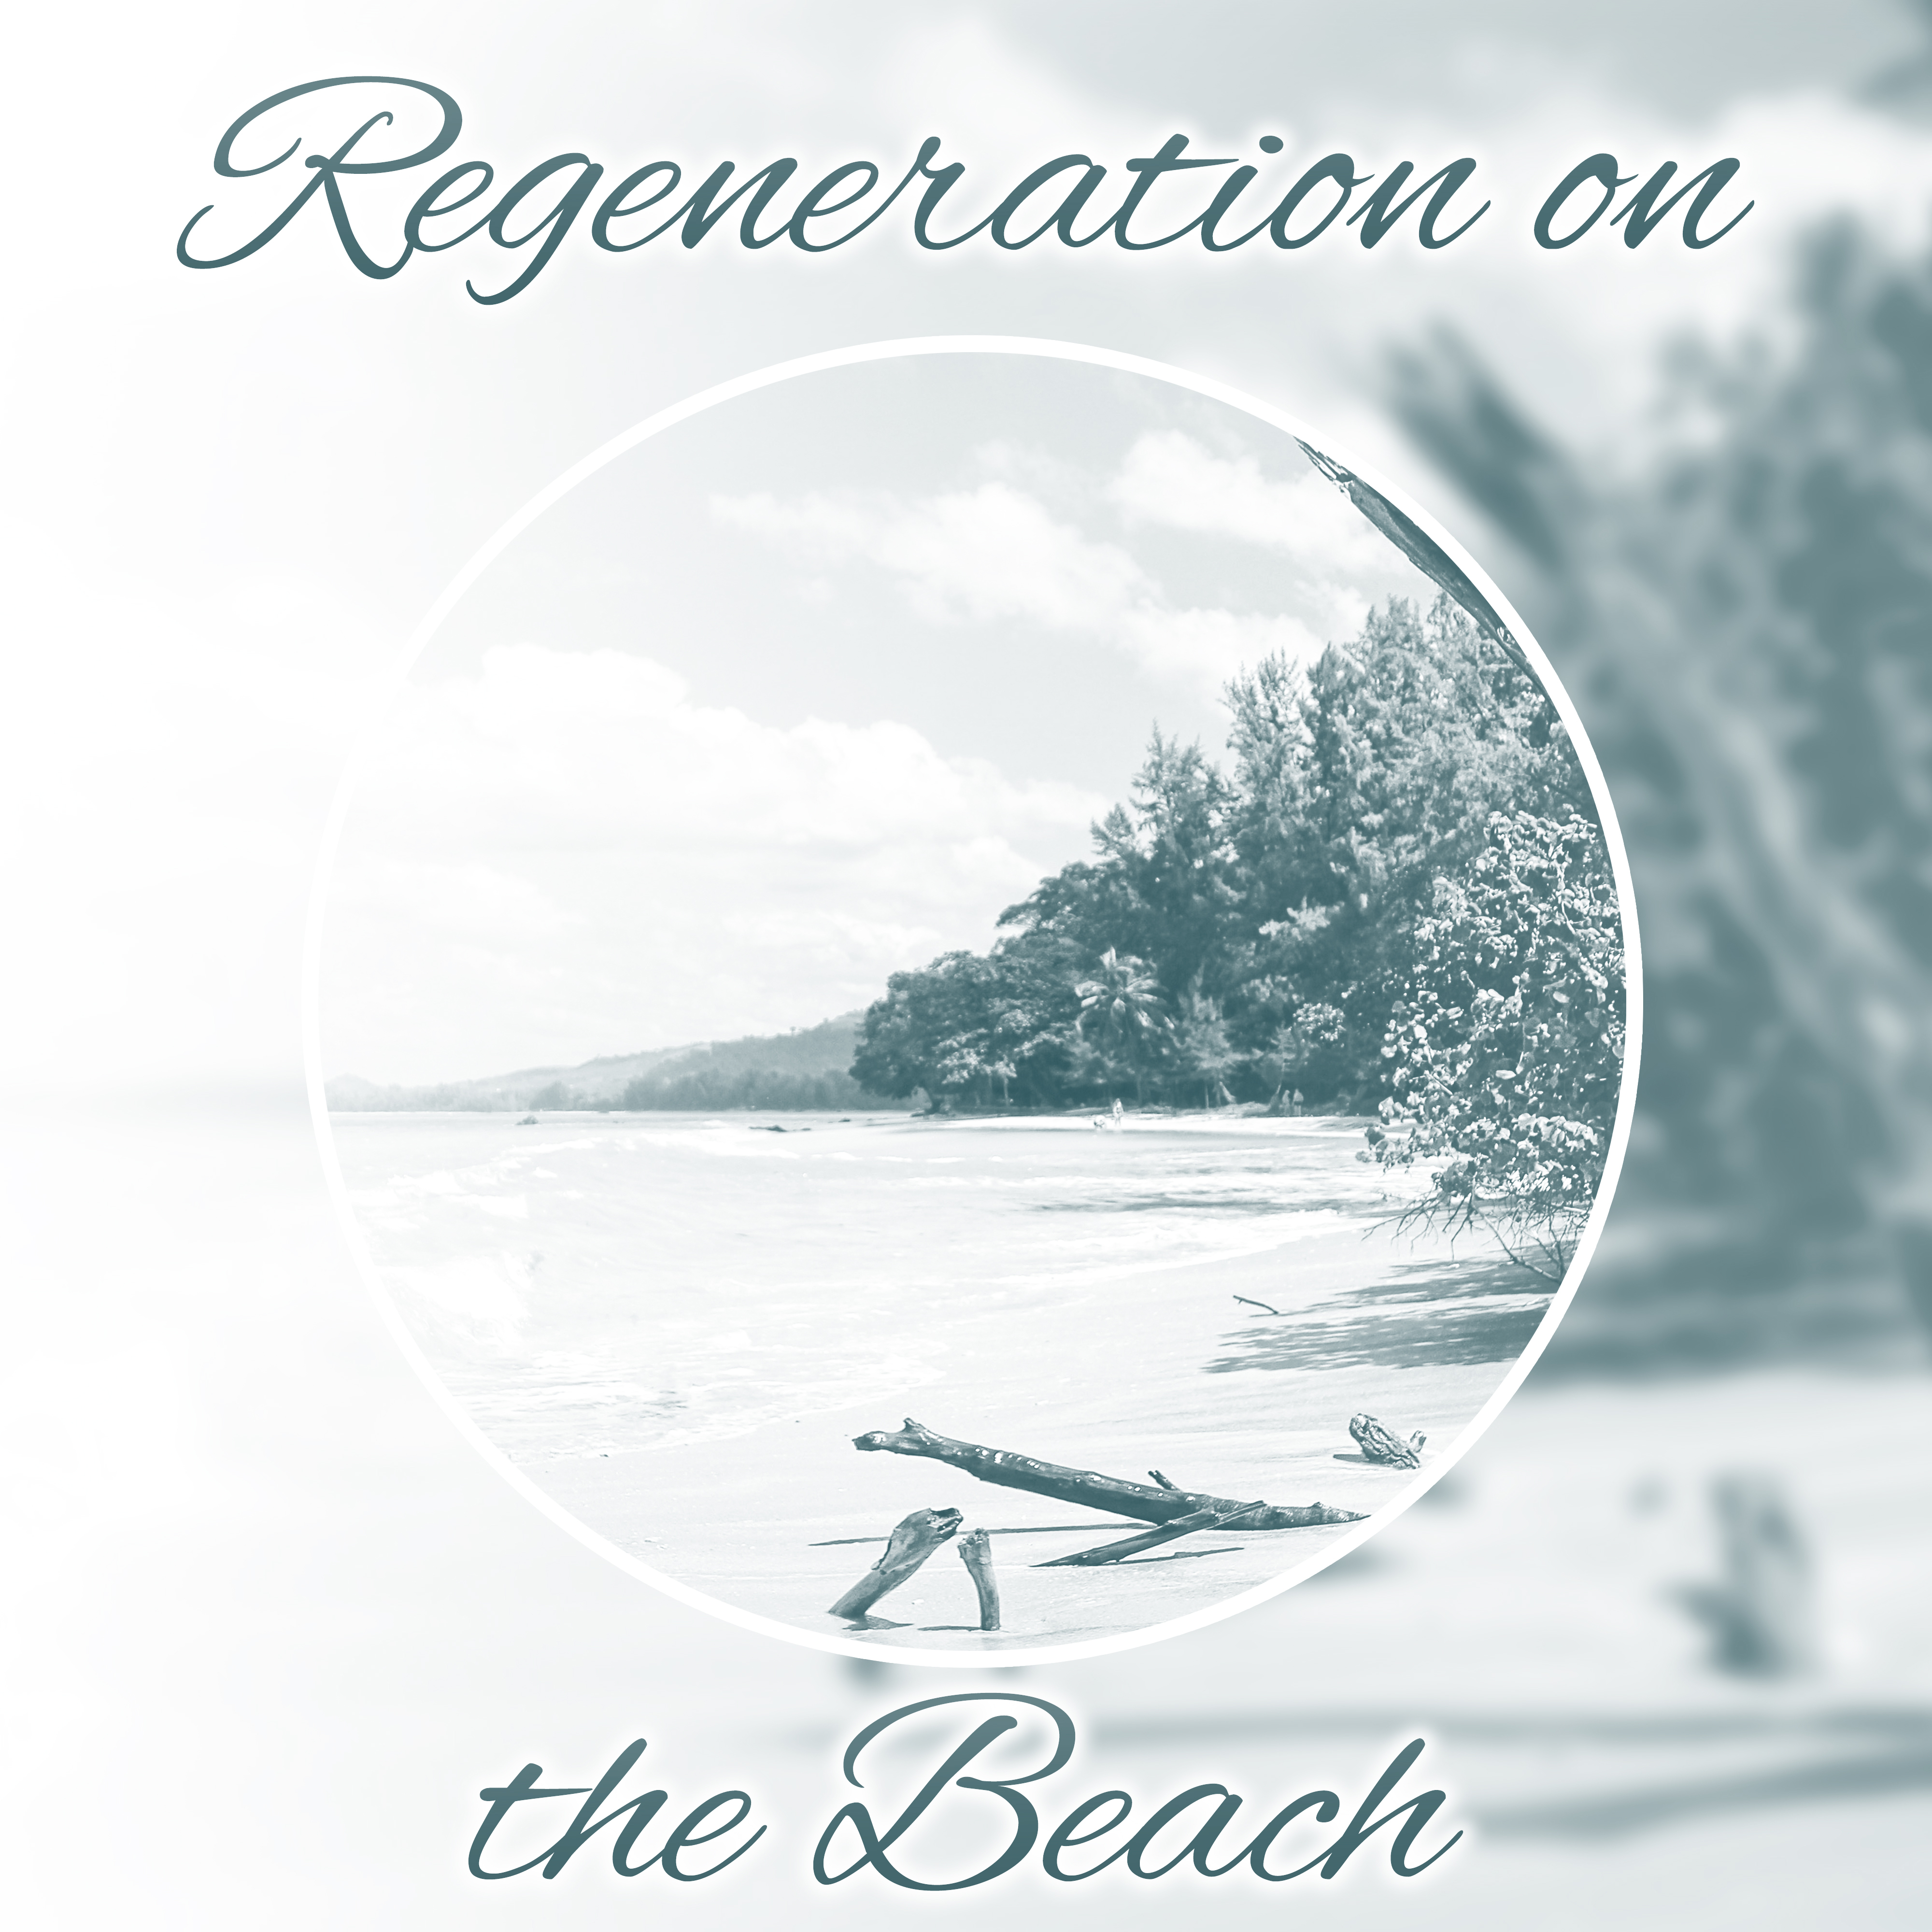 Regeneration on the Beach  Hot Summer, Relax Under Palms, Ibiza Lounge, Summertime, Tropical Chill Out Music